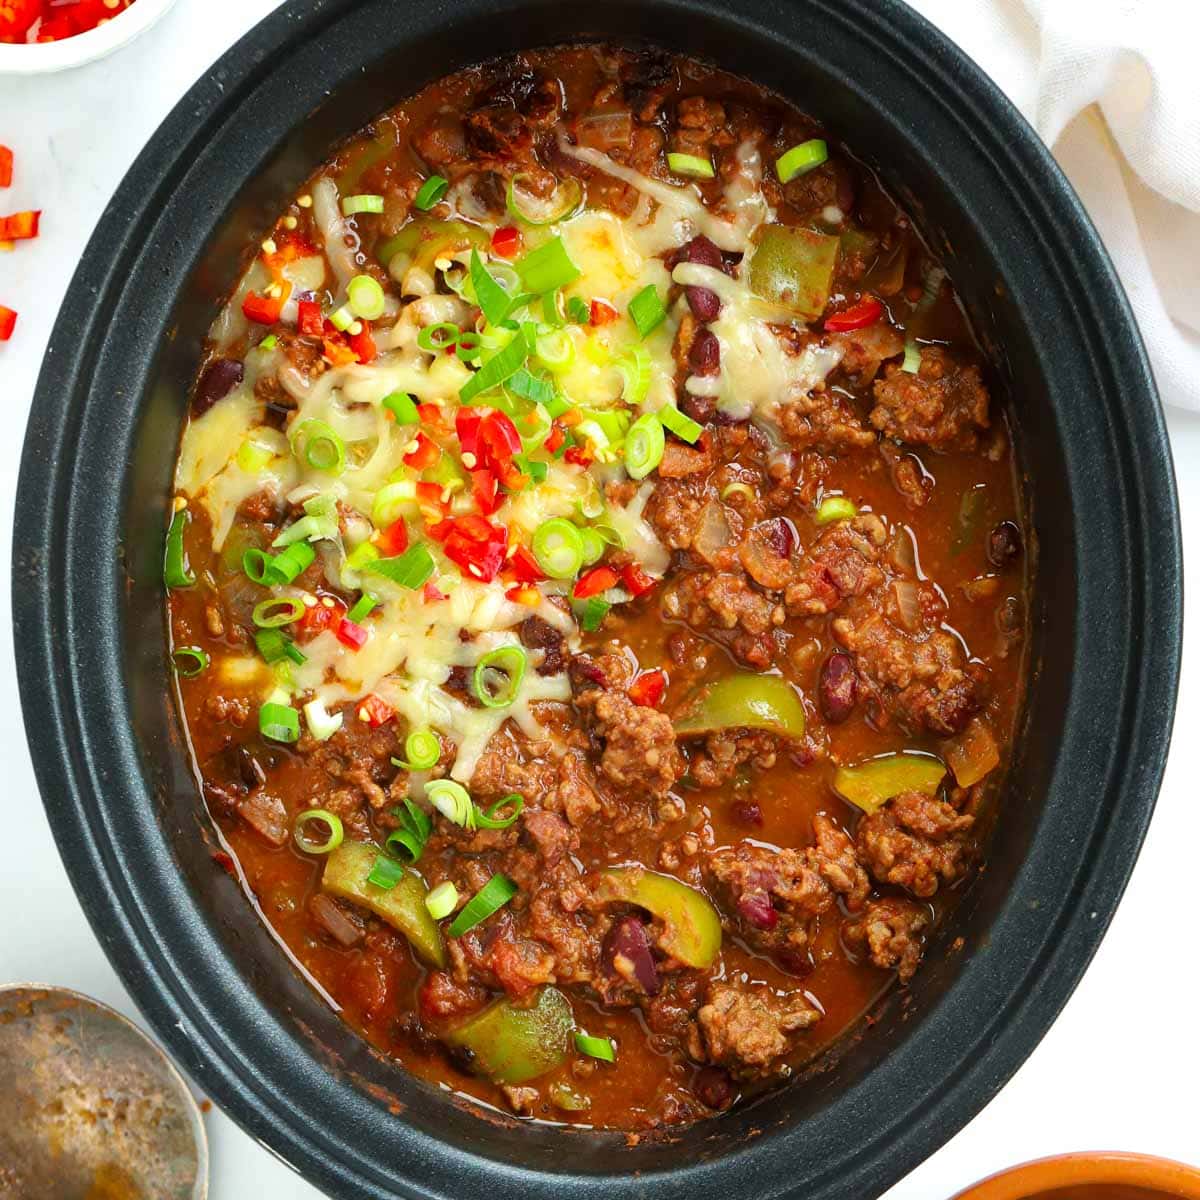 3 Amazing Slow Cooker Recipes-And A Slow Cooker Contest